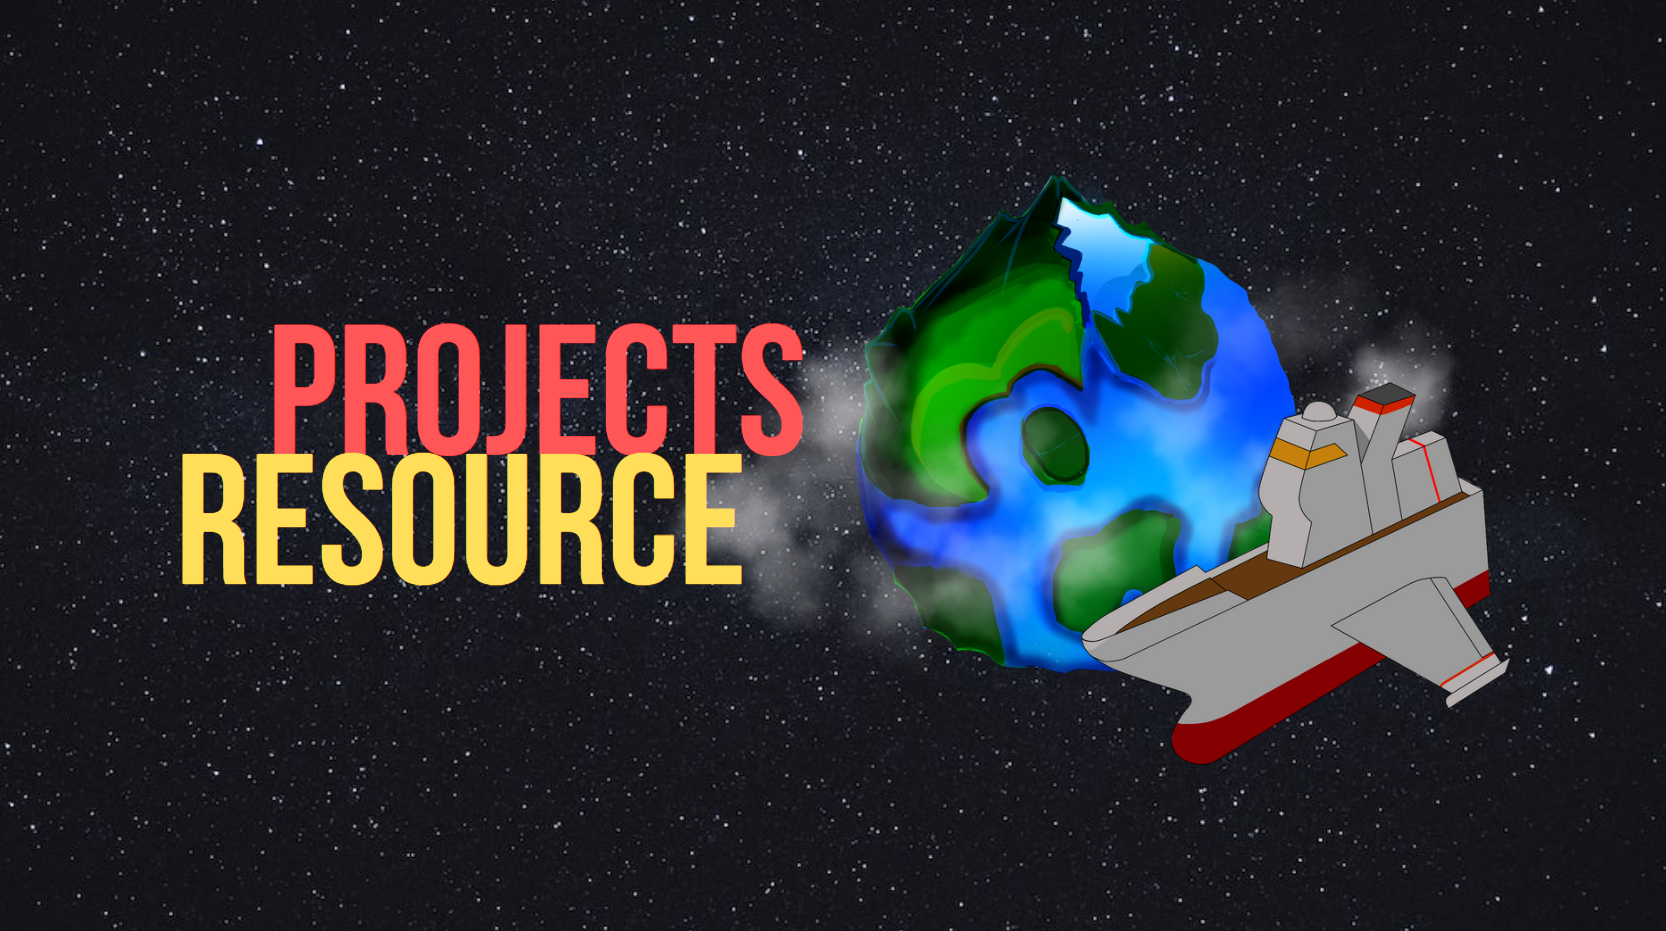 Projects Resource